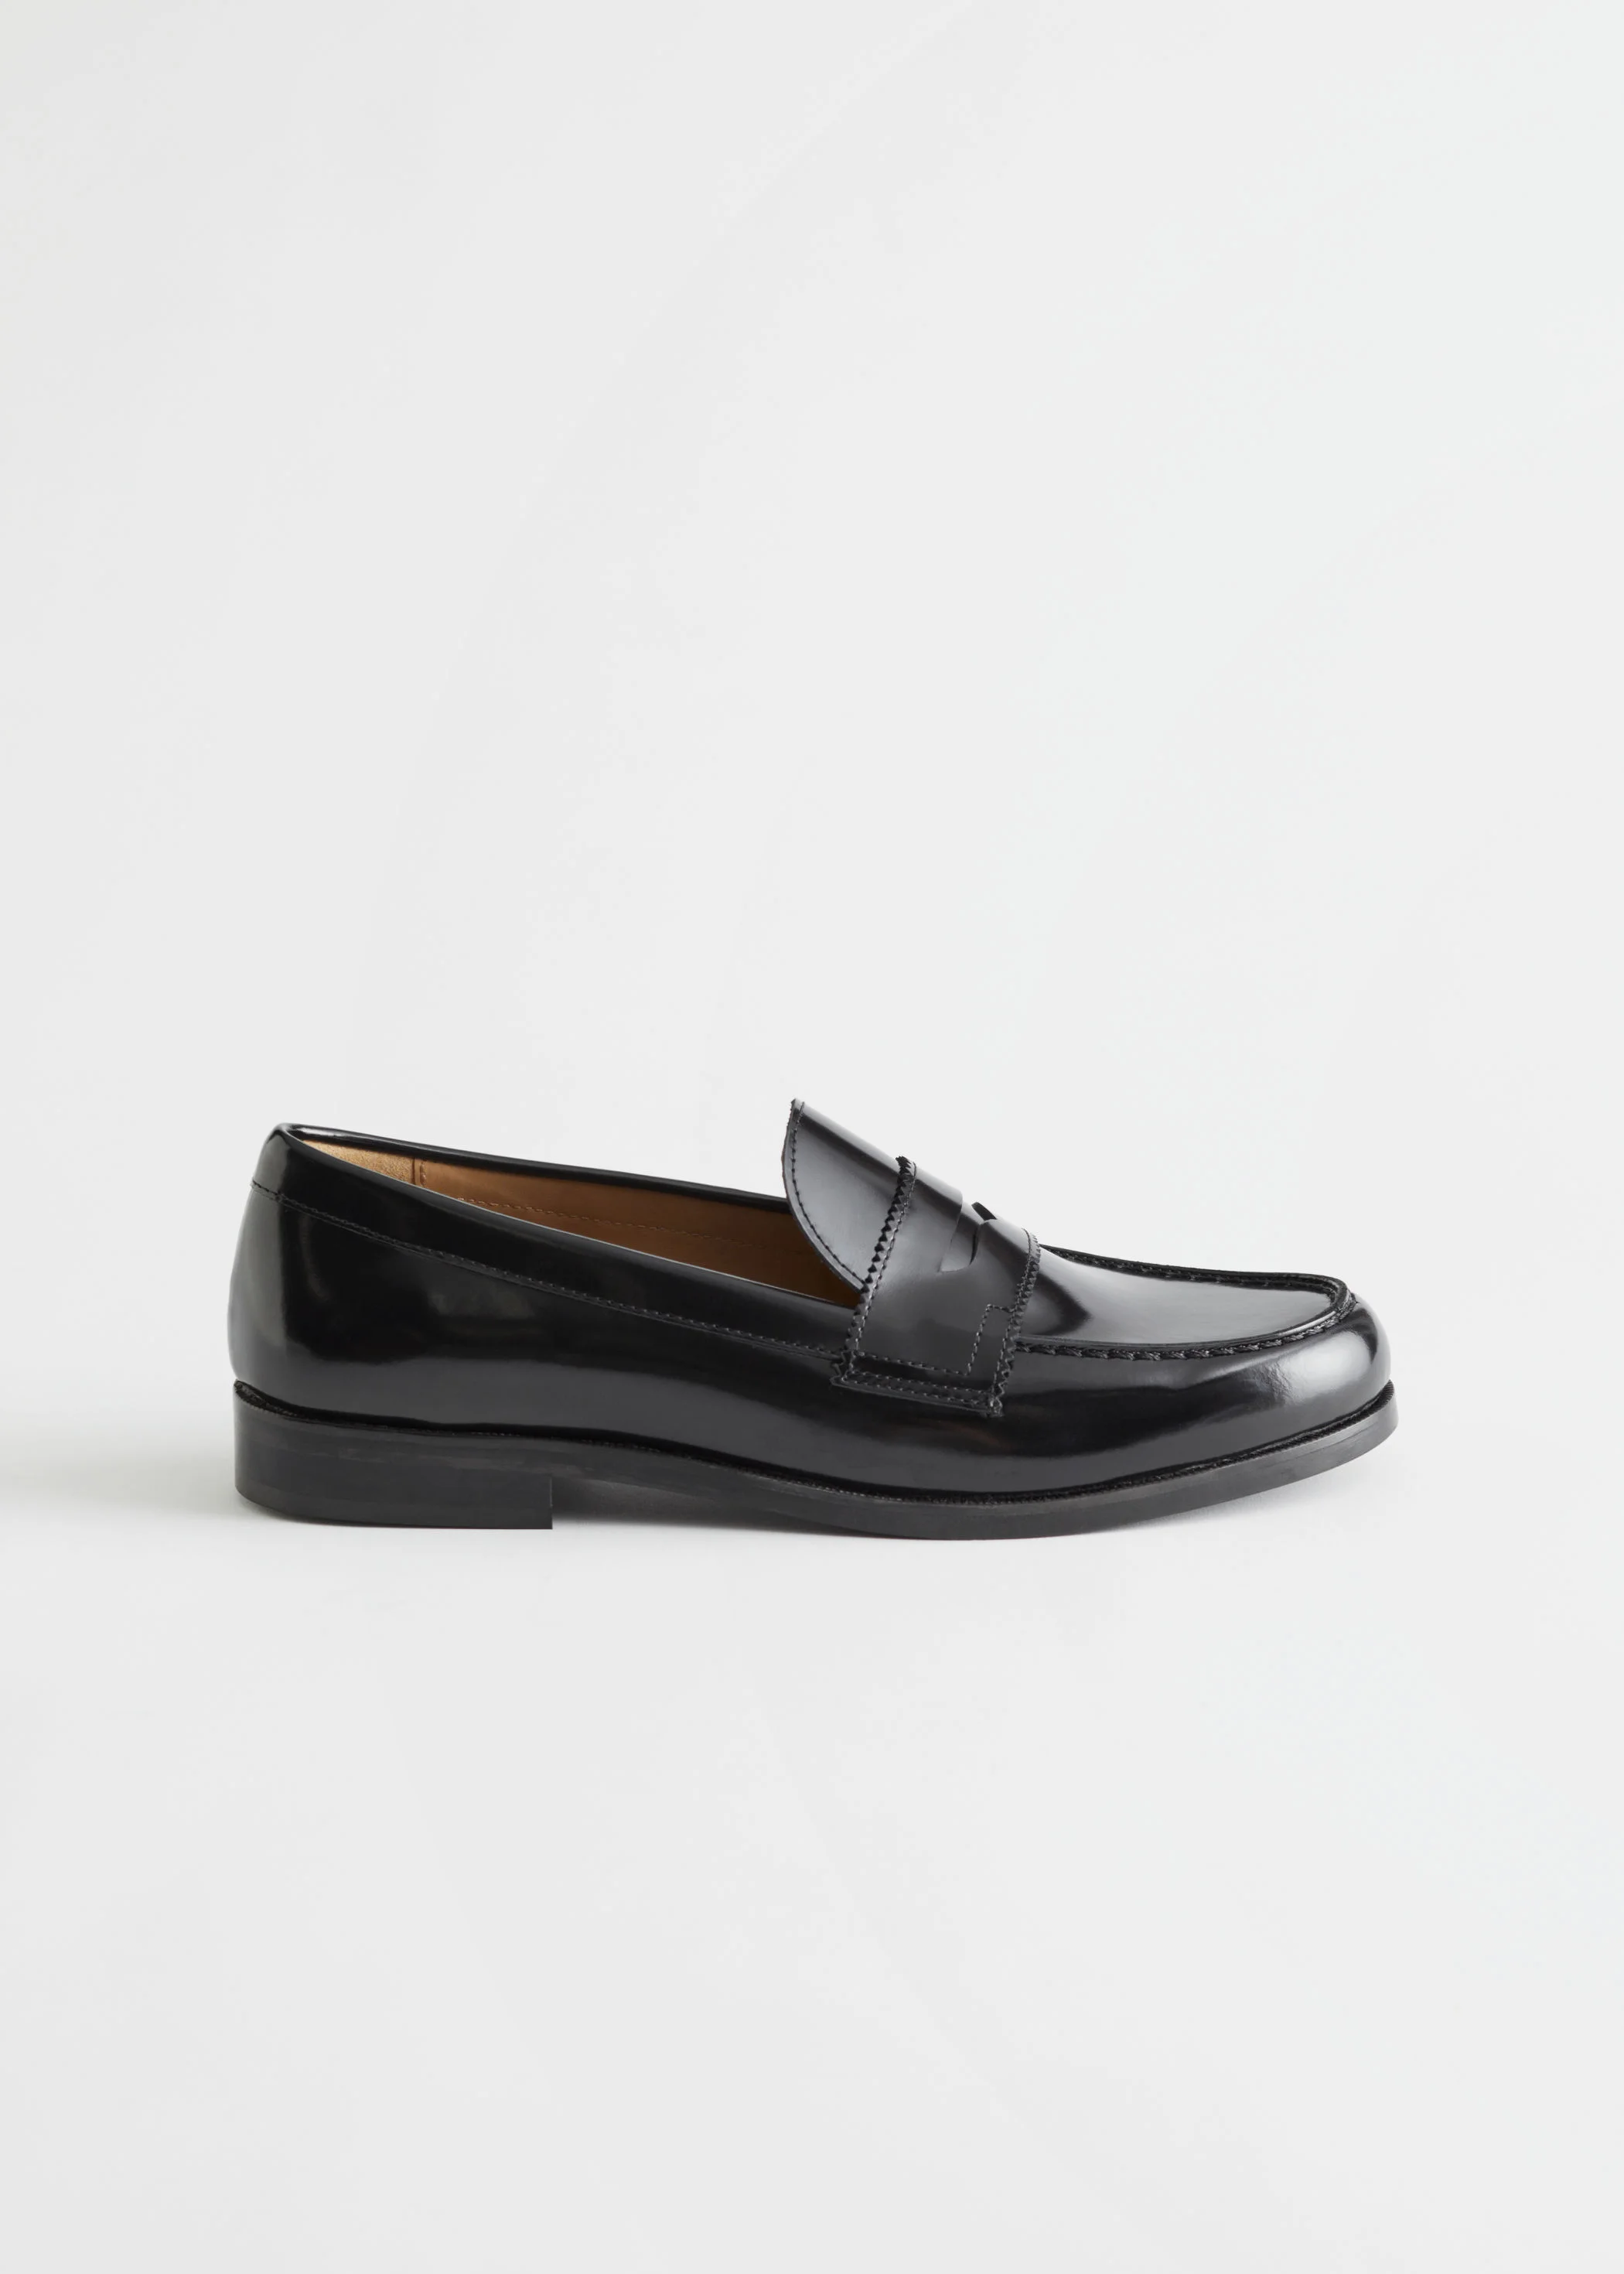 Other Stories Leather Penny Loafers